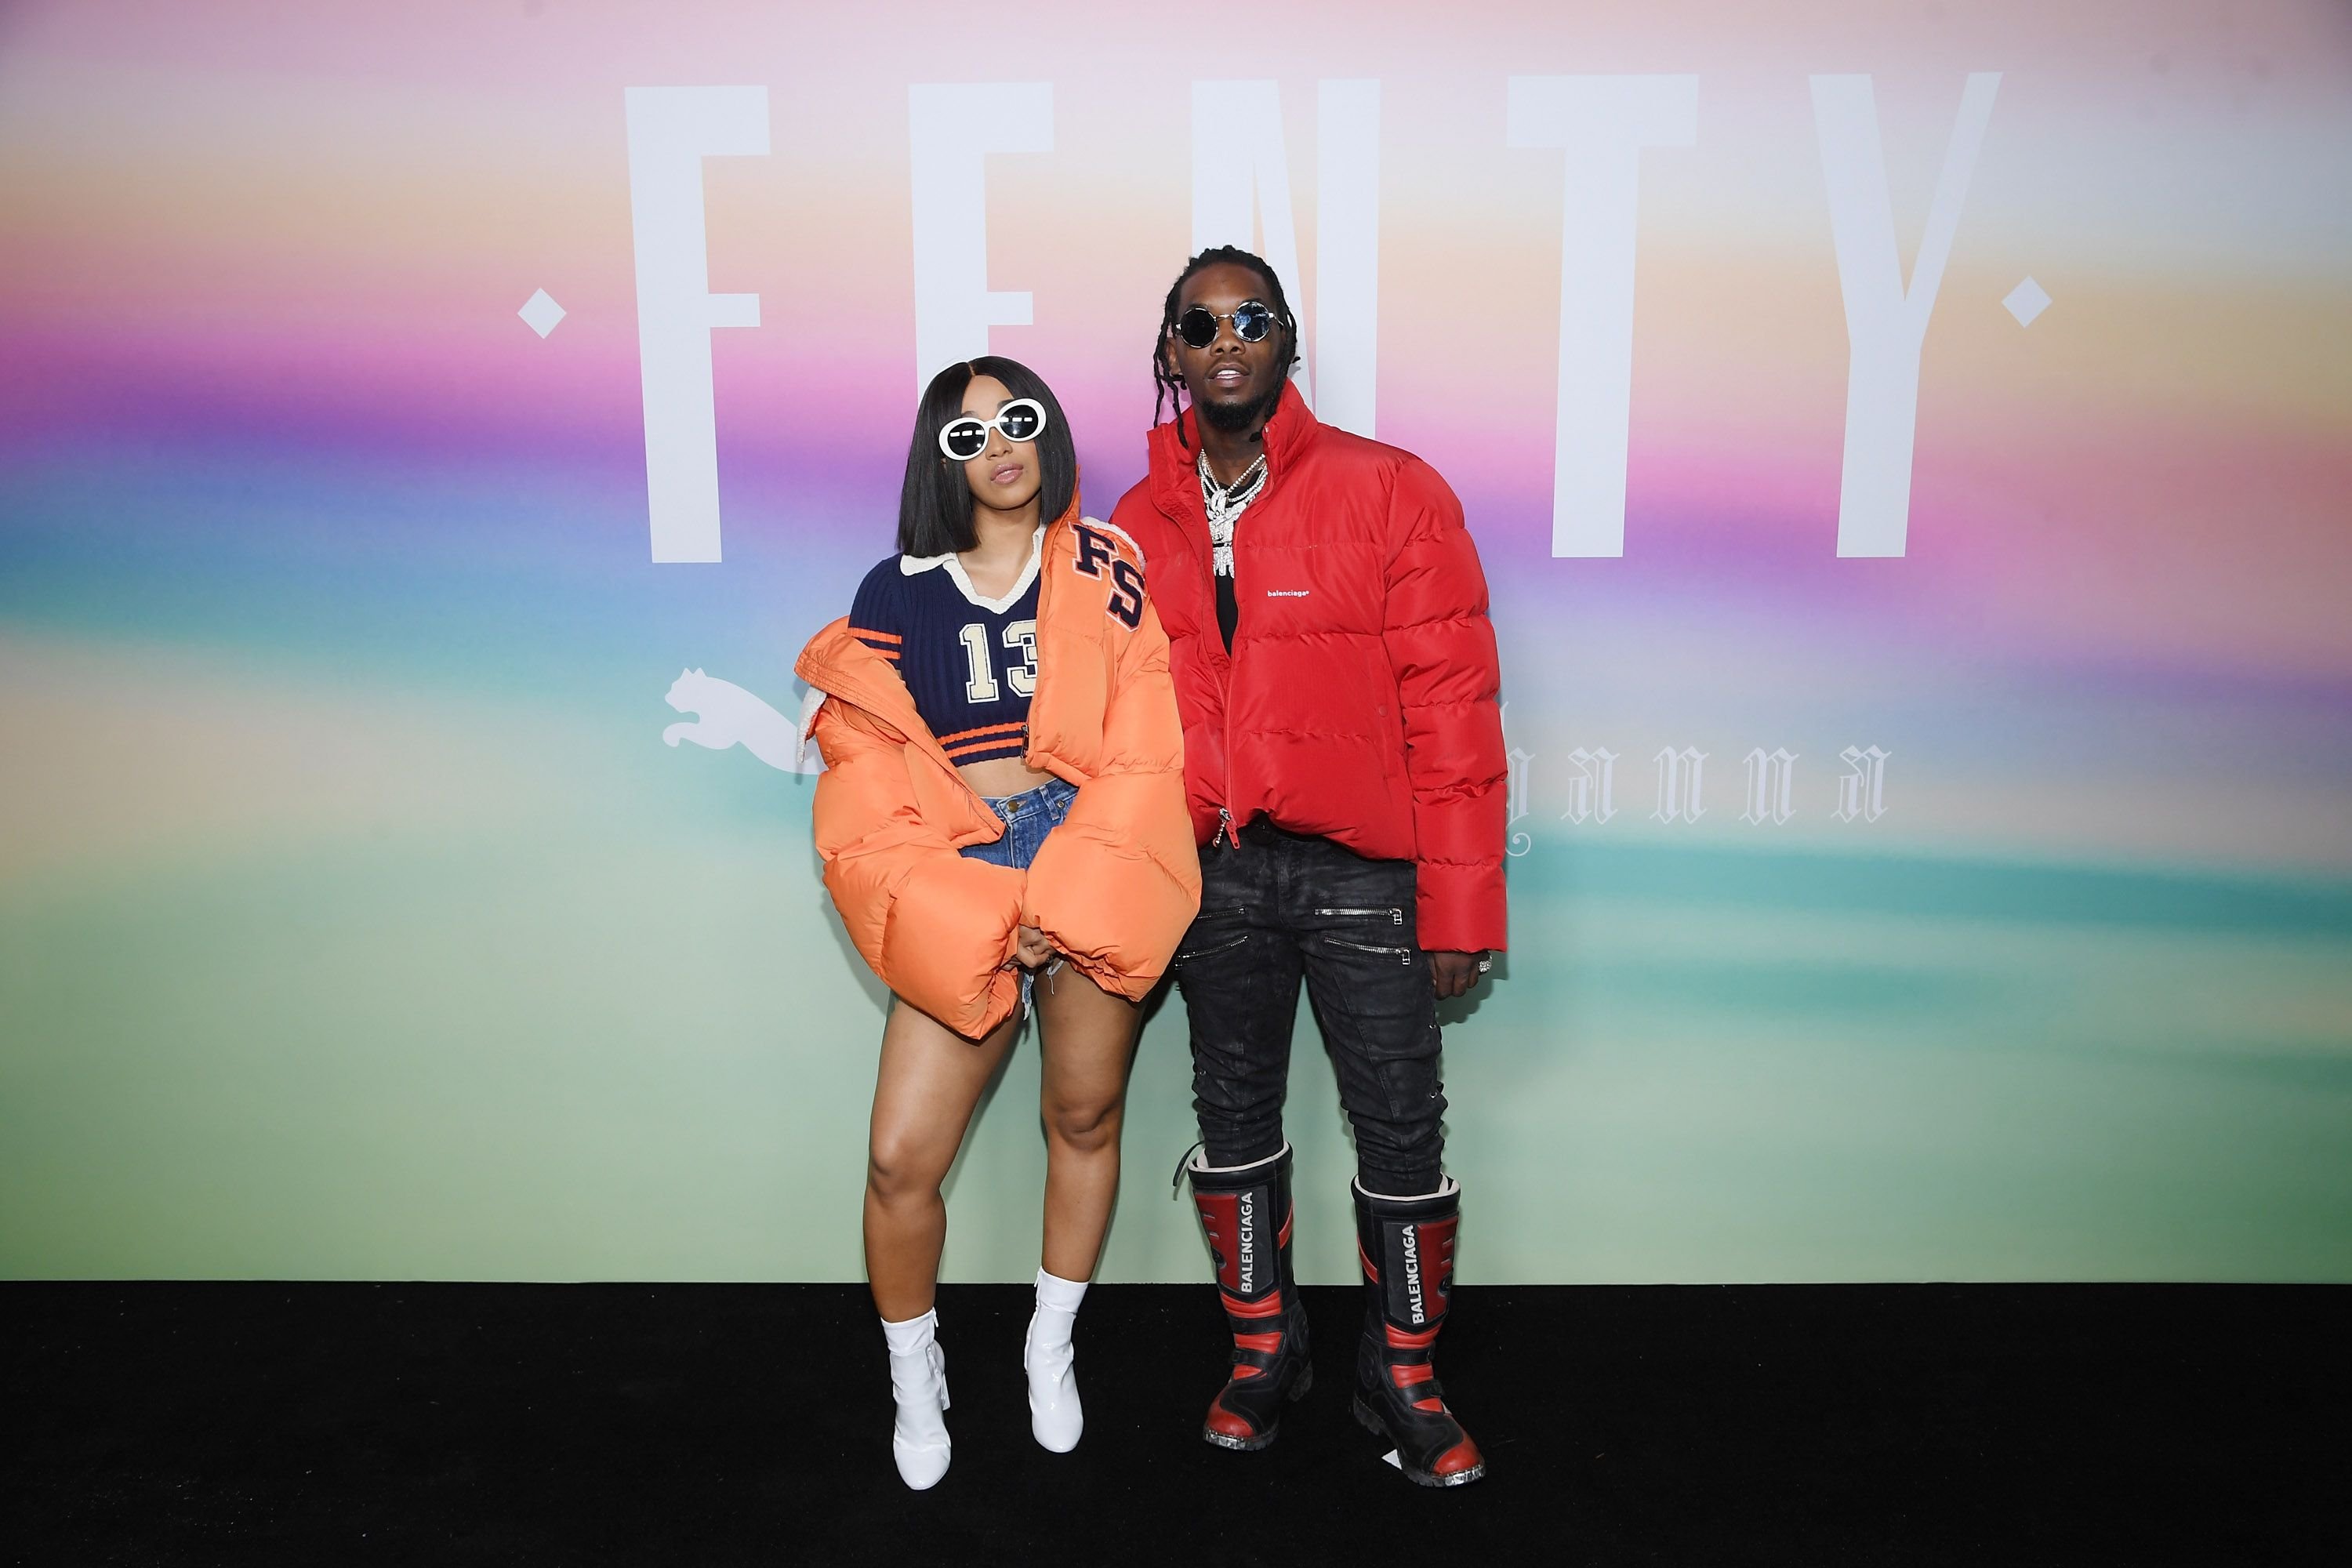 Offset and Cardi B attending the Fenty Puma by Rihanna event in September 10, 2017 in New York | Source: Getty Images